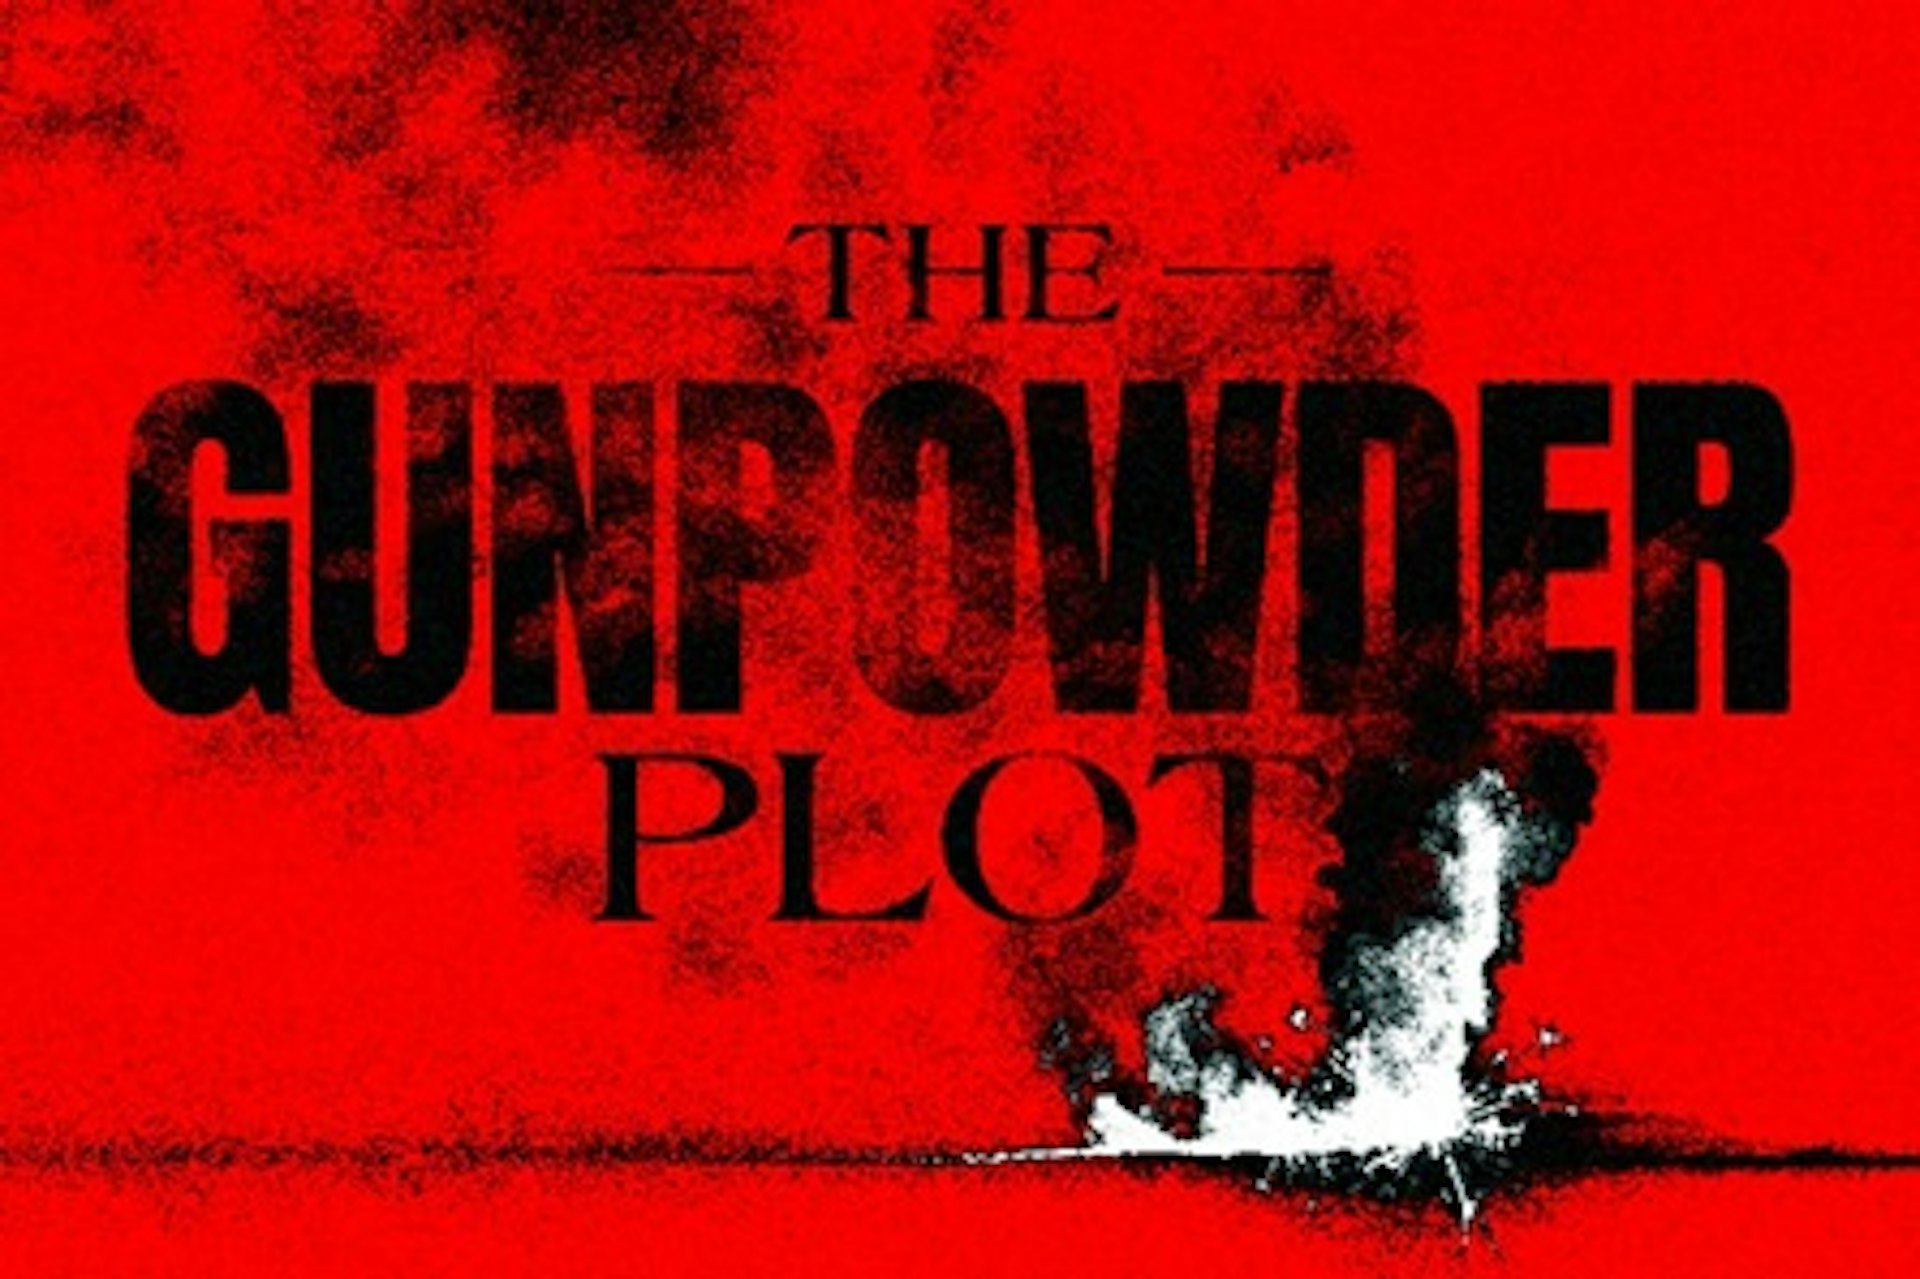 The Gunpowder Plot Immersive Experience for Two Adults and Two Children at The Tower Vaults - Peak 1